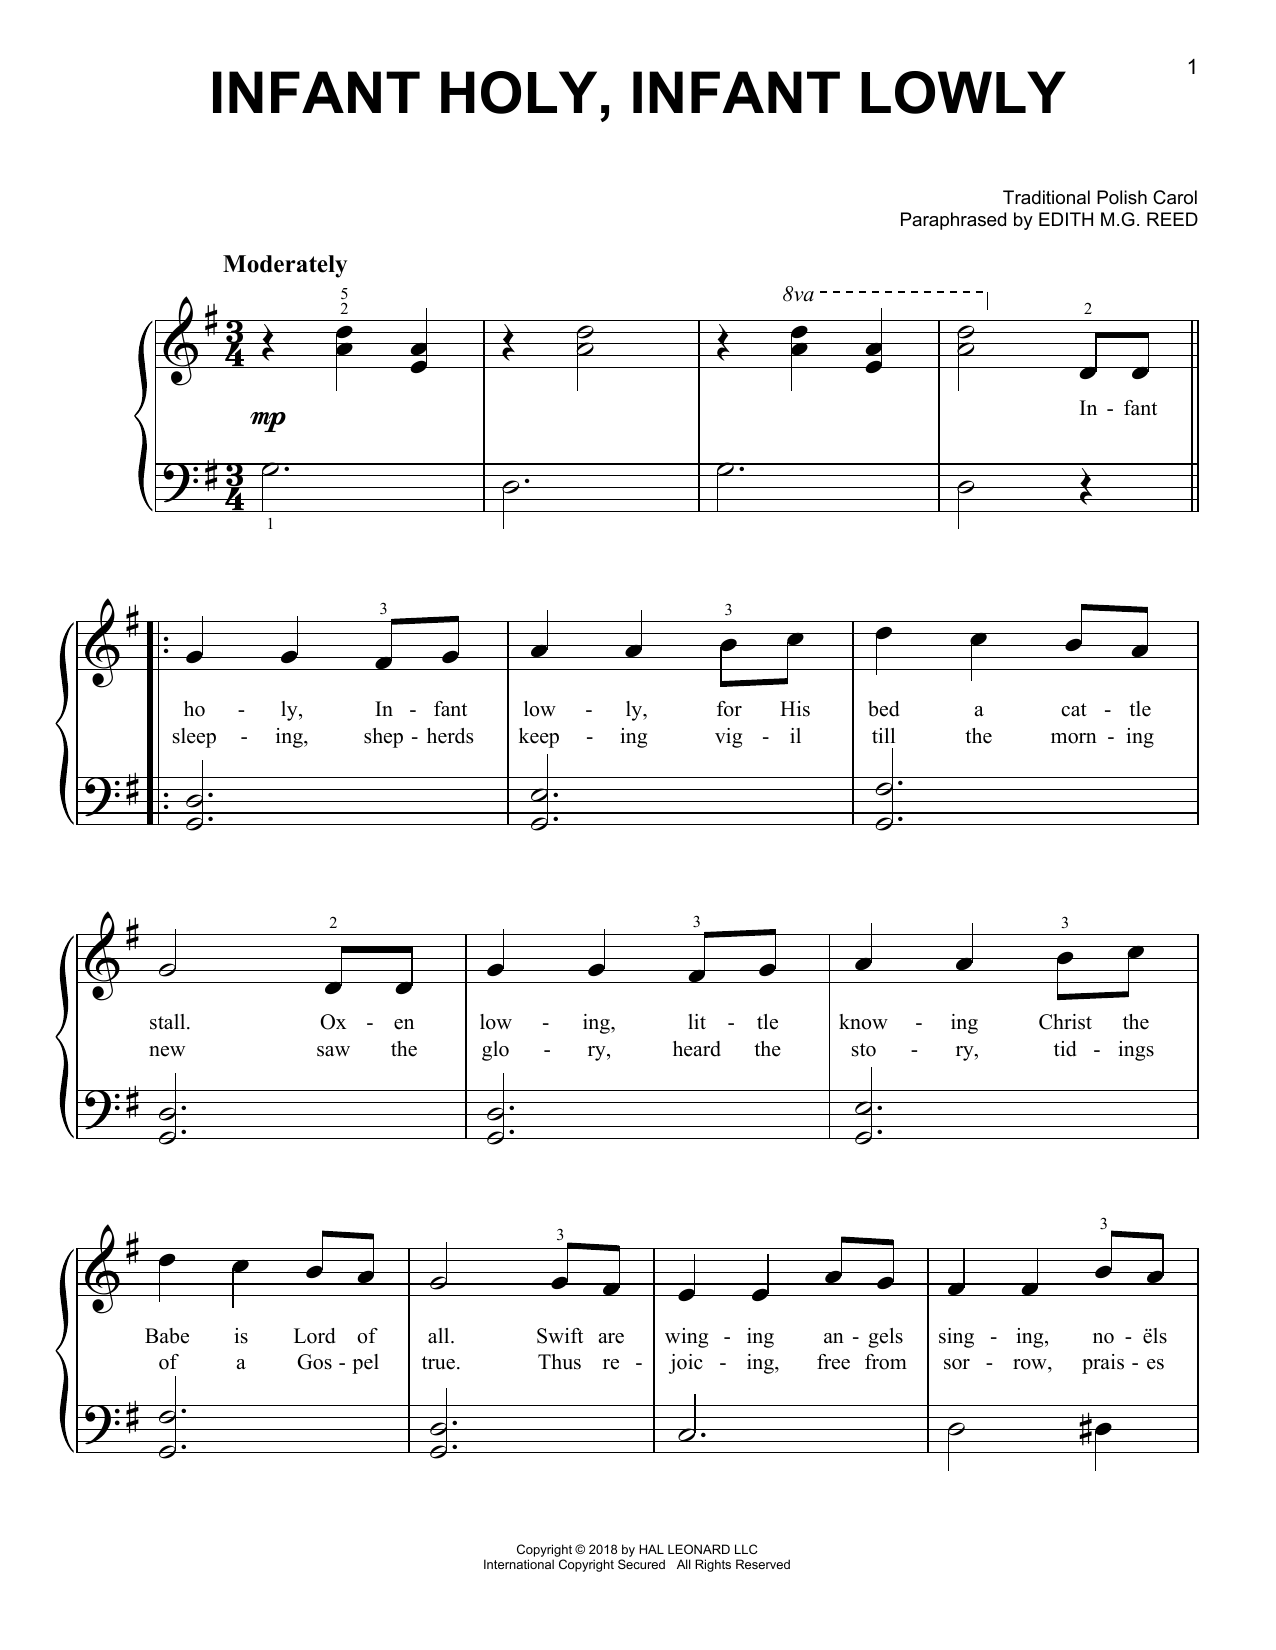 Download Traditional Polish Carol Infant Holy, Infant Lowly Sheet Music